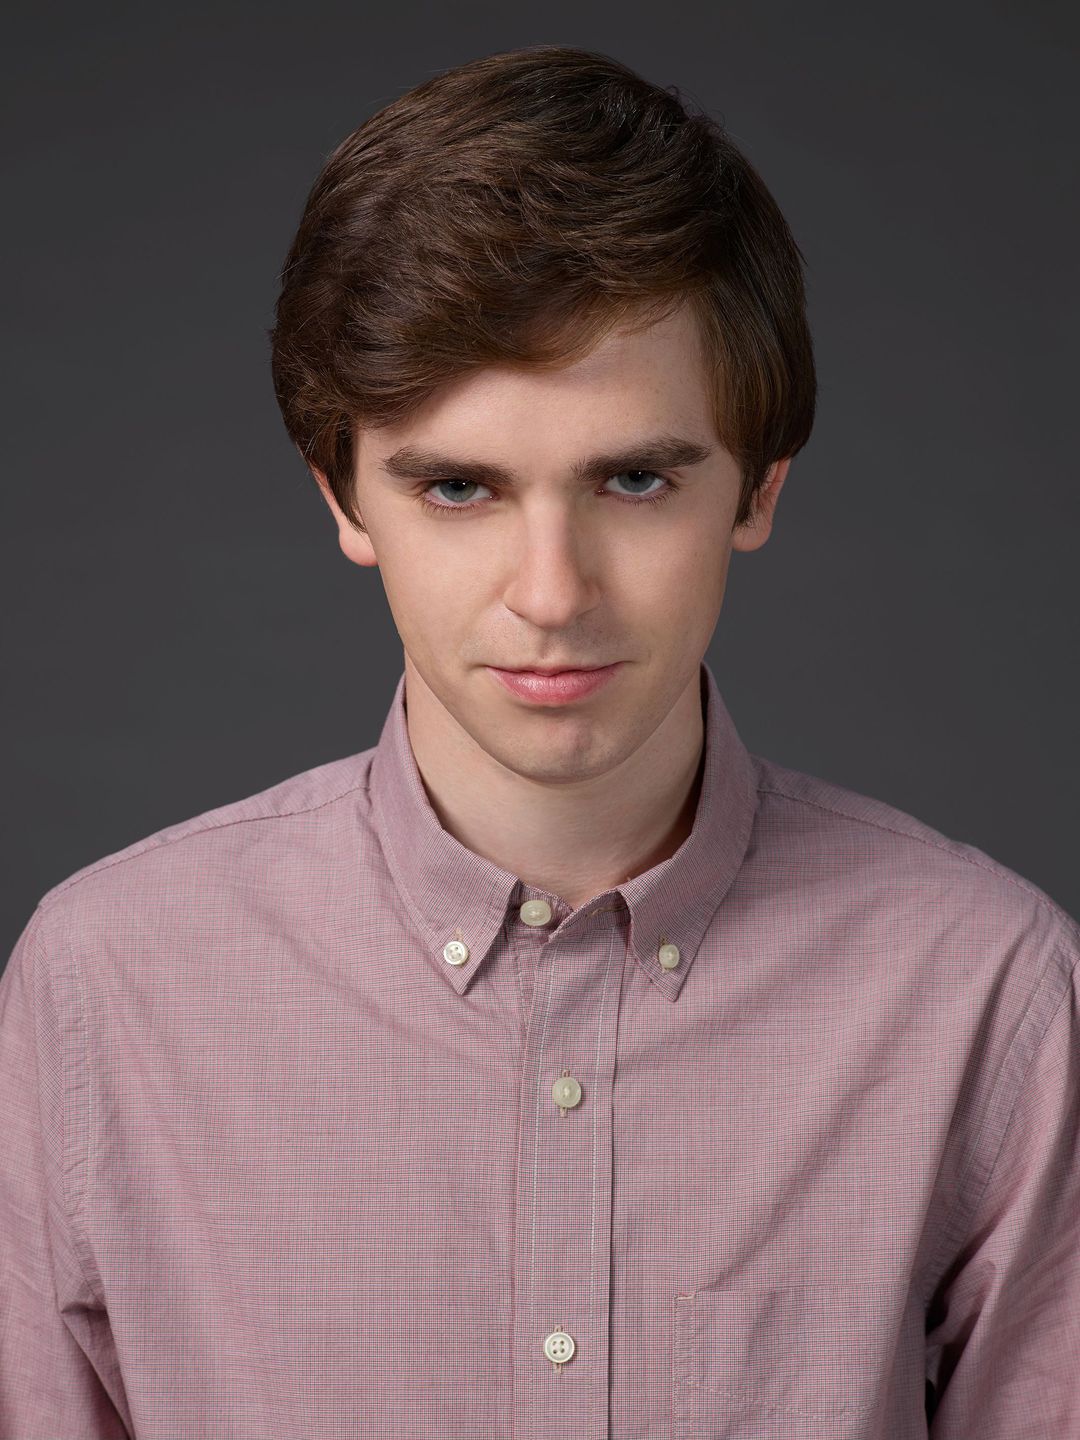 Freddie Highmore in his youth